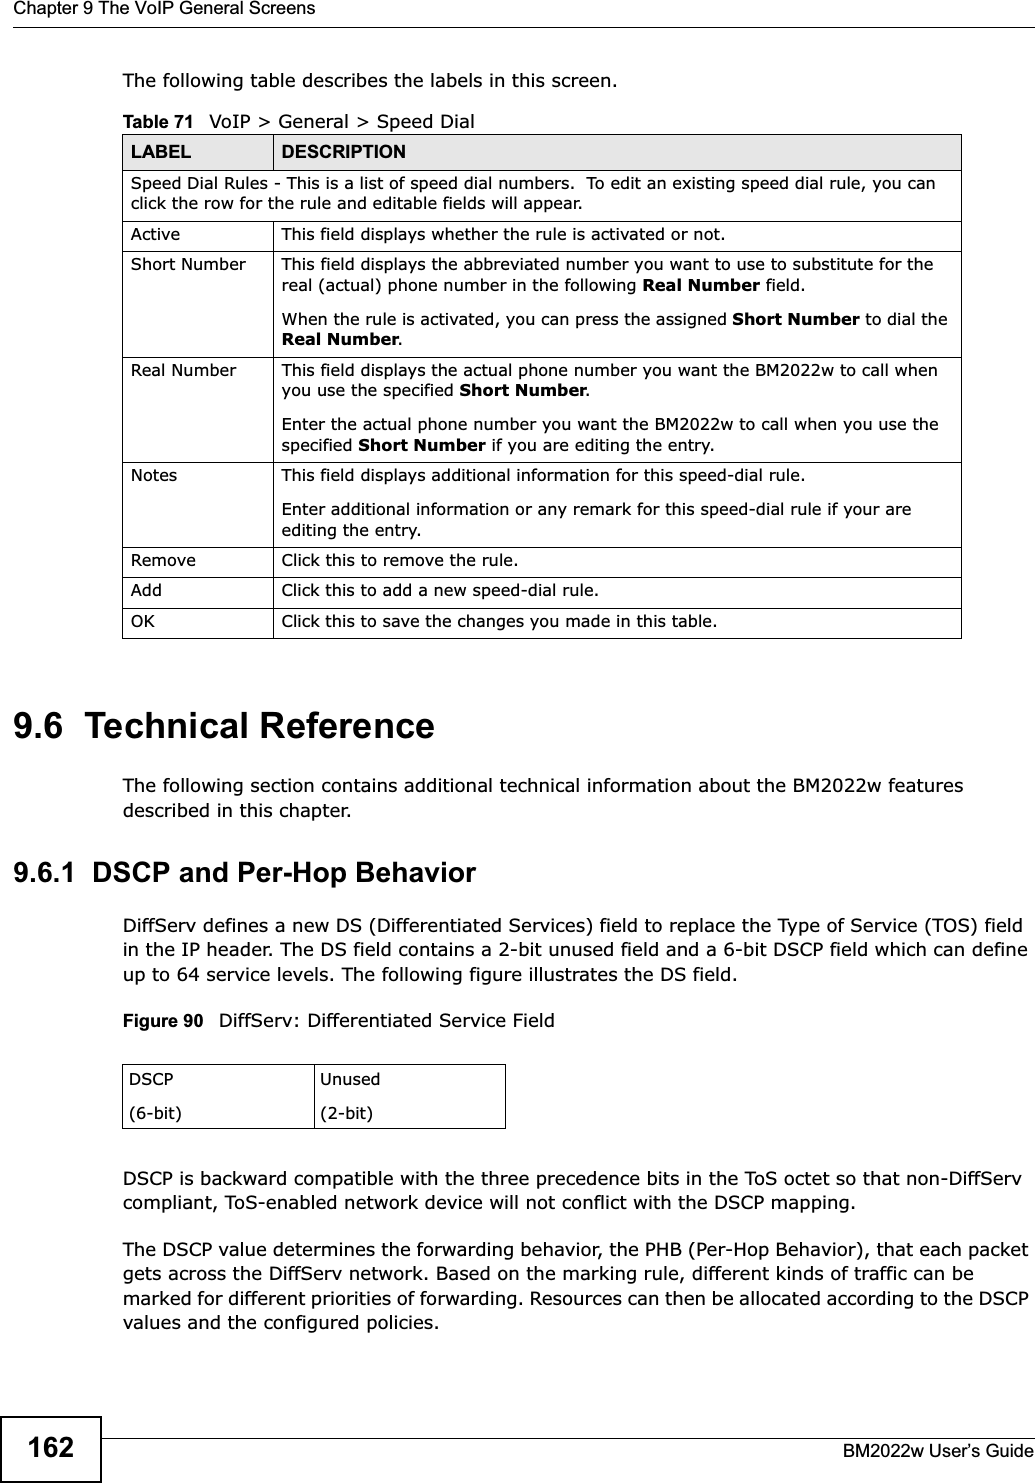 Chapter 9 The VoIP General ScreensBM2022w User’s Guide162The following table describes the labels in this screen.  9.6  Technical ReferenceThe following section contains additional technical information about the BM2022w features described in this chapter.9.6.1  DSCP and Per-Hop Behavior DiffServ defines a new DS (Differentiated Services) field to replace the Type of Service (TOS) field in the IP header. The DS field contains a 2-bit unused field and a 6-bit DSCP field which can define up to 64 service levels. The following figure illustrates the DS field. Figure 90   DiffServ: Differentiated Service FieldDSCP is backward compatible with the three precedence bits in the ToS octet so that non-DiffServ compliant, ToS-enabled network device will not conflict with the DSCP mapping. The DSCP value determines the forwarding behavior, the PHB (Per-Hop Behavior), that each packet gets across the DiffServ network. Based on the marking rule, different kinds of traffic can be marked for different priorities of forwarding. Resources can then be allocated according to the DSCP values and the configured policies.Table 71   VoIP &gt; General &gt; Speed DialLABEL DESCRIPTIONSpeed Dial Rules - This is a list of speed dial numbers.  To edit an existing speed dial rule, you can click the row for the rule and editable fields will appear.Active This field displays whether the rule is activated or not.Short Number This field displays the abbreviated number you want to use to substitute for the real (actual) phone number in the following Real Number field. When the rule is activated, you can press the assigned Short Number to dial the Real Number.Real Number This field displays the actual phone number you want the BM2022w to call when you use the specified Short Number.Enter the actual phone number you want the BM2022w to call when you use the specified Short Number if you are editing the entry.Notes This field displays additional information for this speed-dial rule.Enter additional information or any remark for this speed-dial rule if your are editing the entry.Remove Click this to remove the rule.Add Click this to add a new speed-dial rule.OK Click this to save the changes you made in this table.DSCP(6-bit)Unused(2-bit)